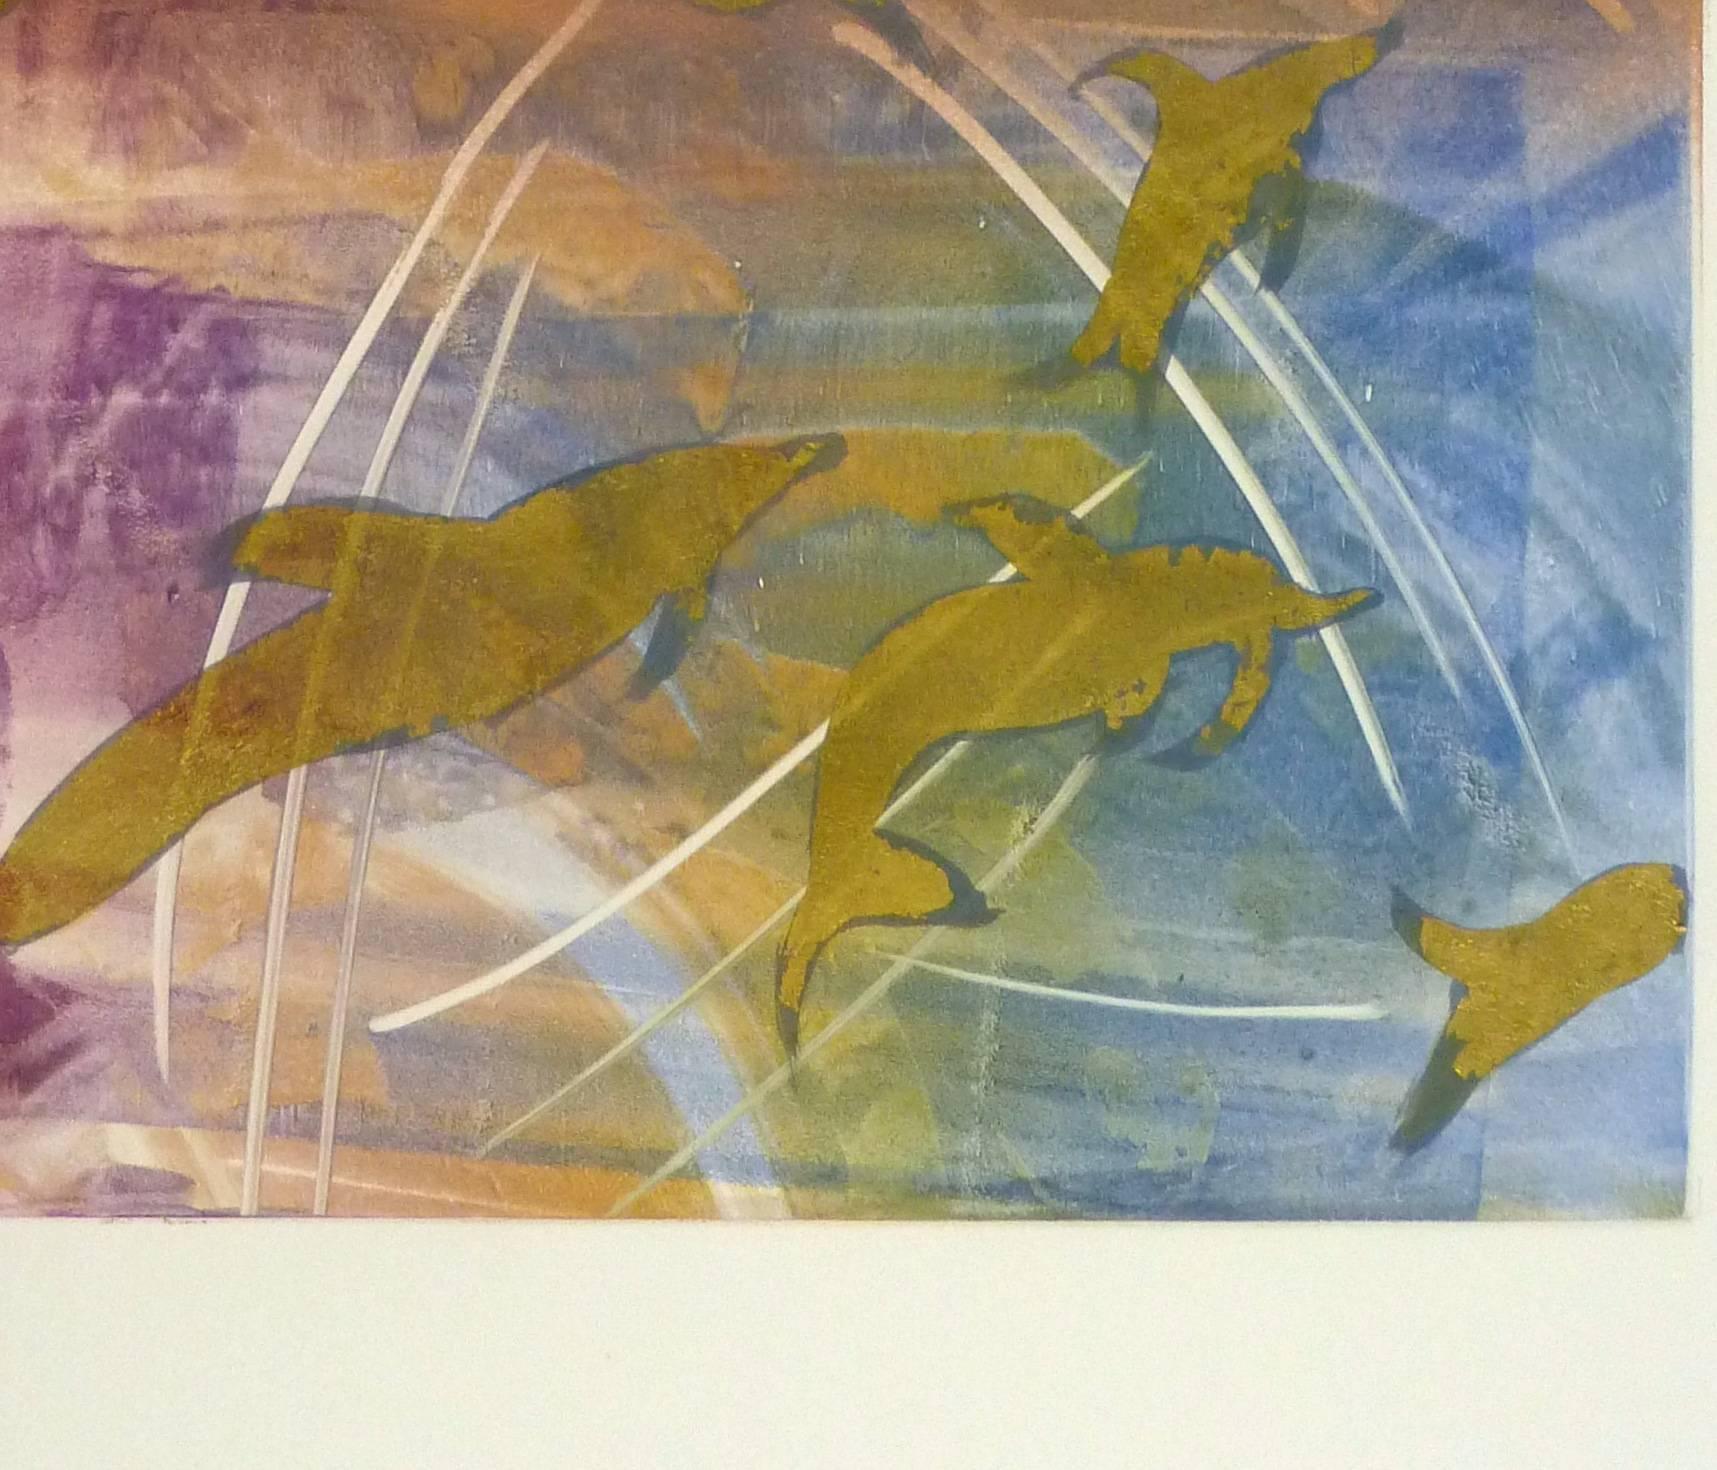 Wonderful mixed media linocut, highlighting dolphins and whales in sparkling paints by American artist Kismine Varner, circa 1990. Unsigned.

Original artwork on paper displayed on a white mat with a gold border. Archival plastic sleeve and